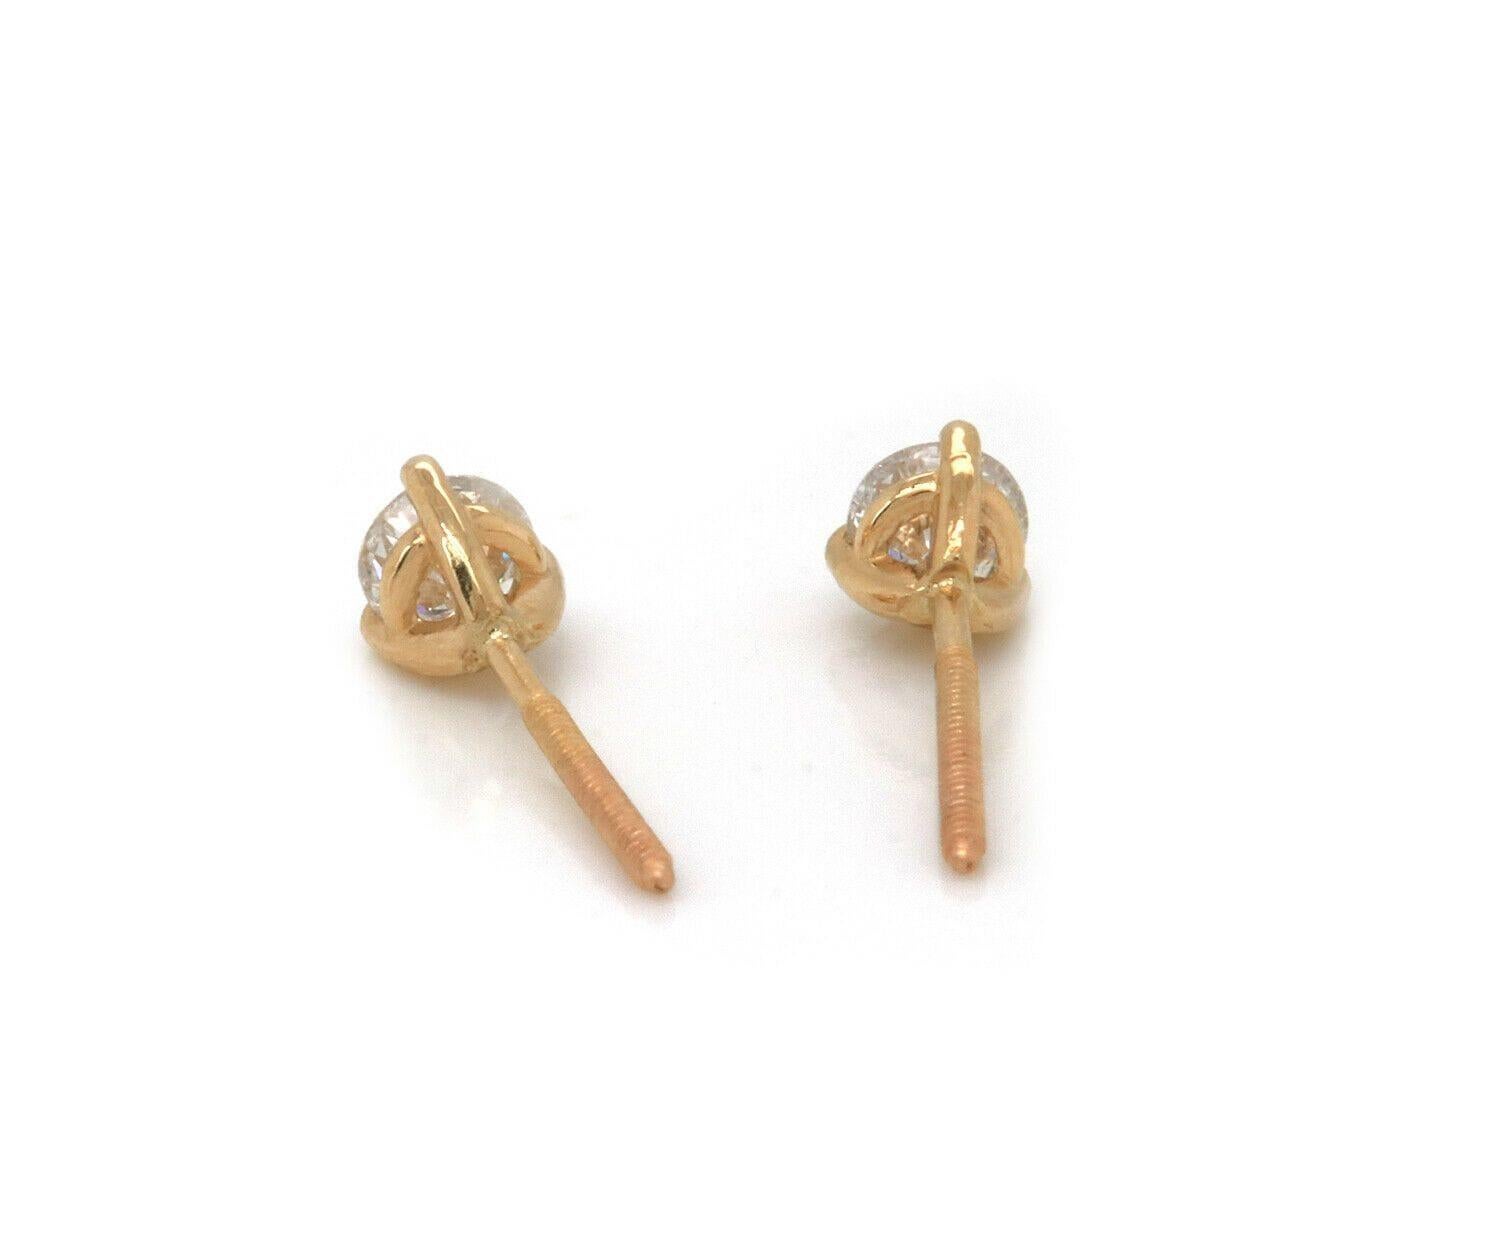 0.64ctw Diamond Solitaire Stud Earrings in 14K Yellow Gold In Excellent Condition For Sale In Vienna, VA